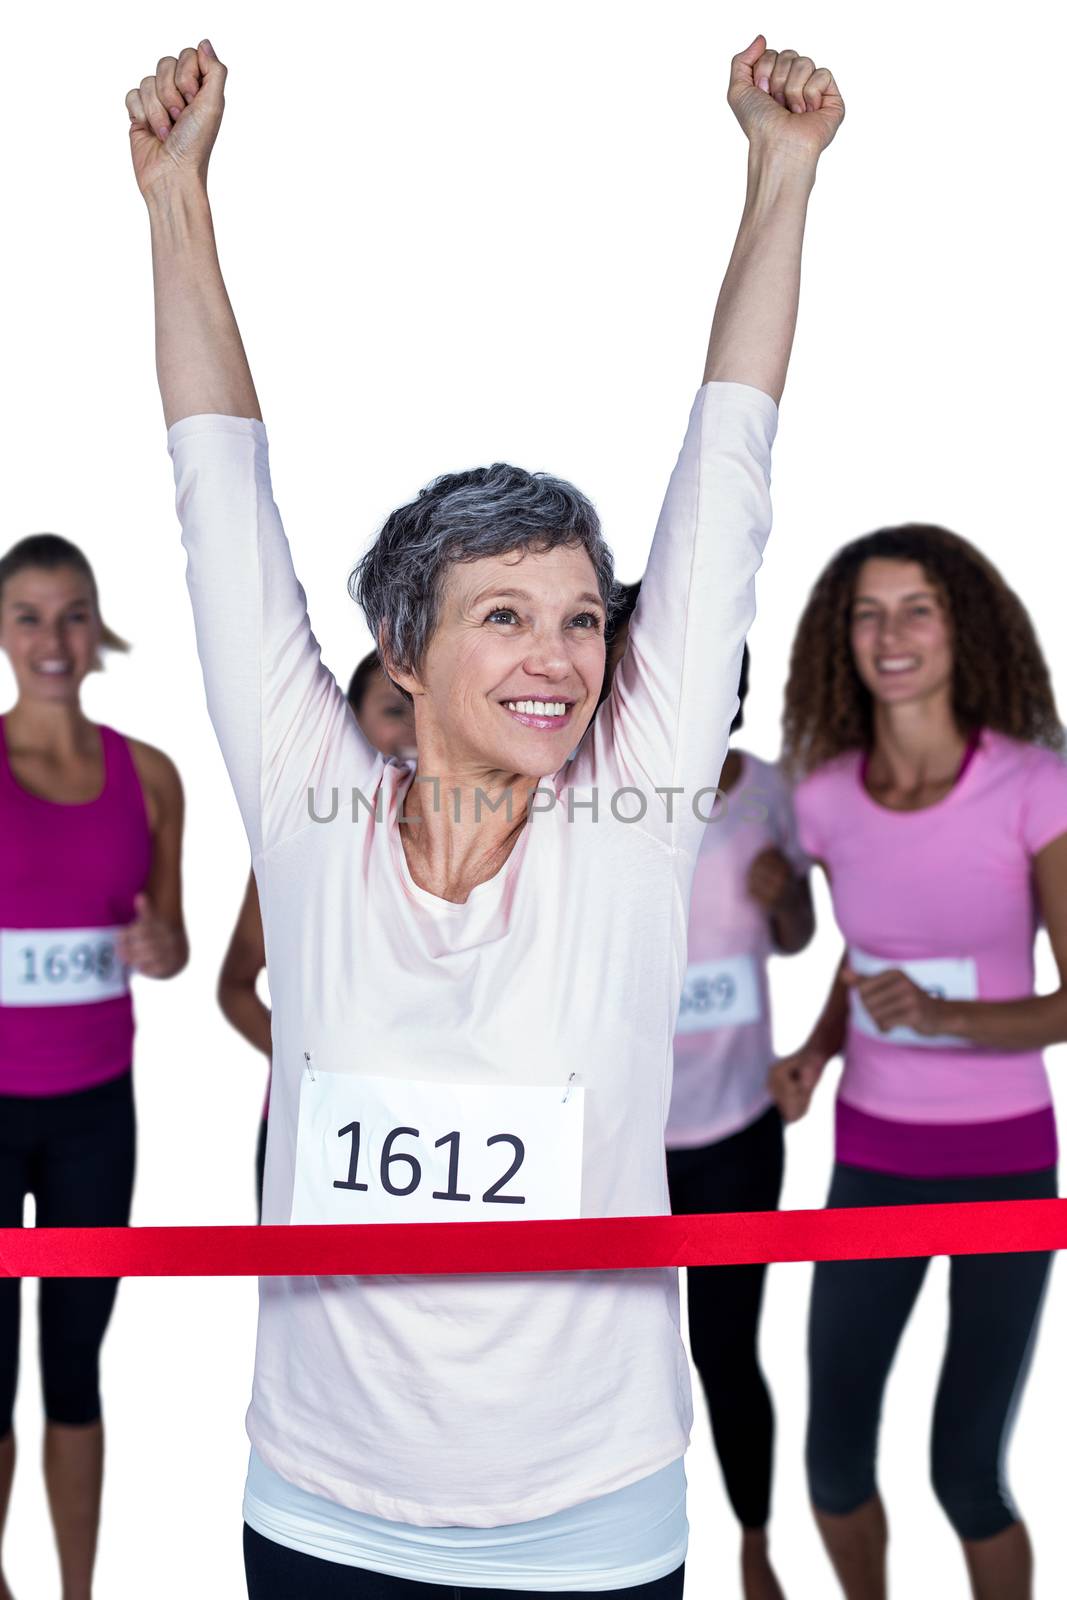 Happy winner athlete crossing finish line with arms raised against white background